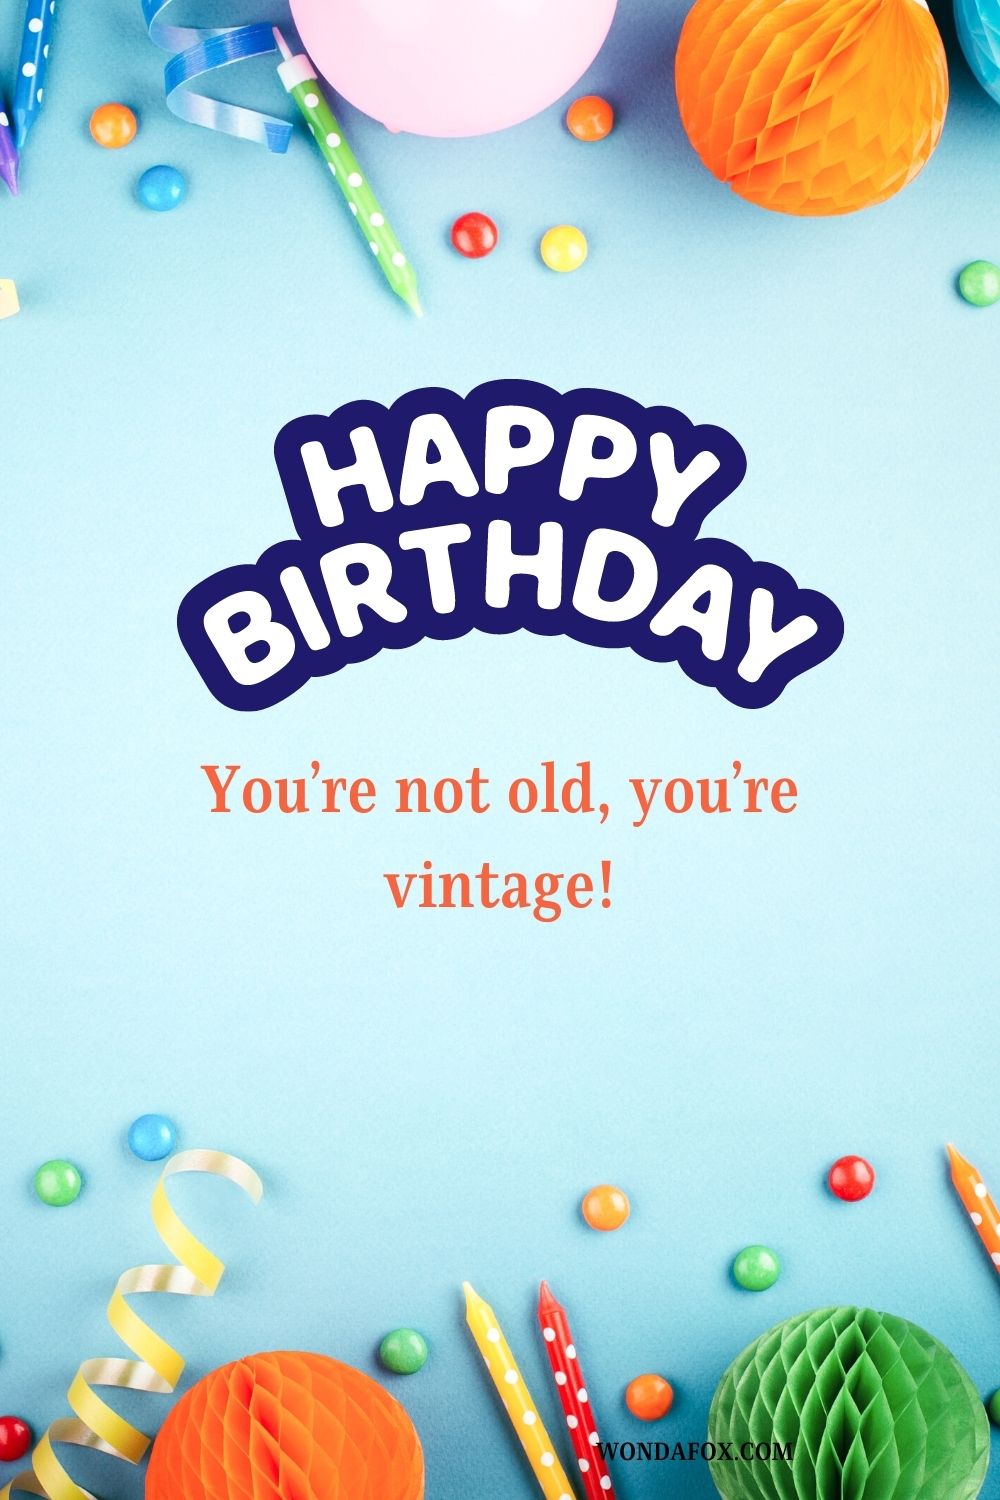 Happy birthday! You’re not old, you’re vintage!